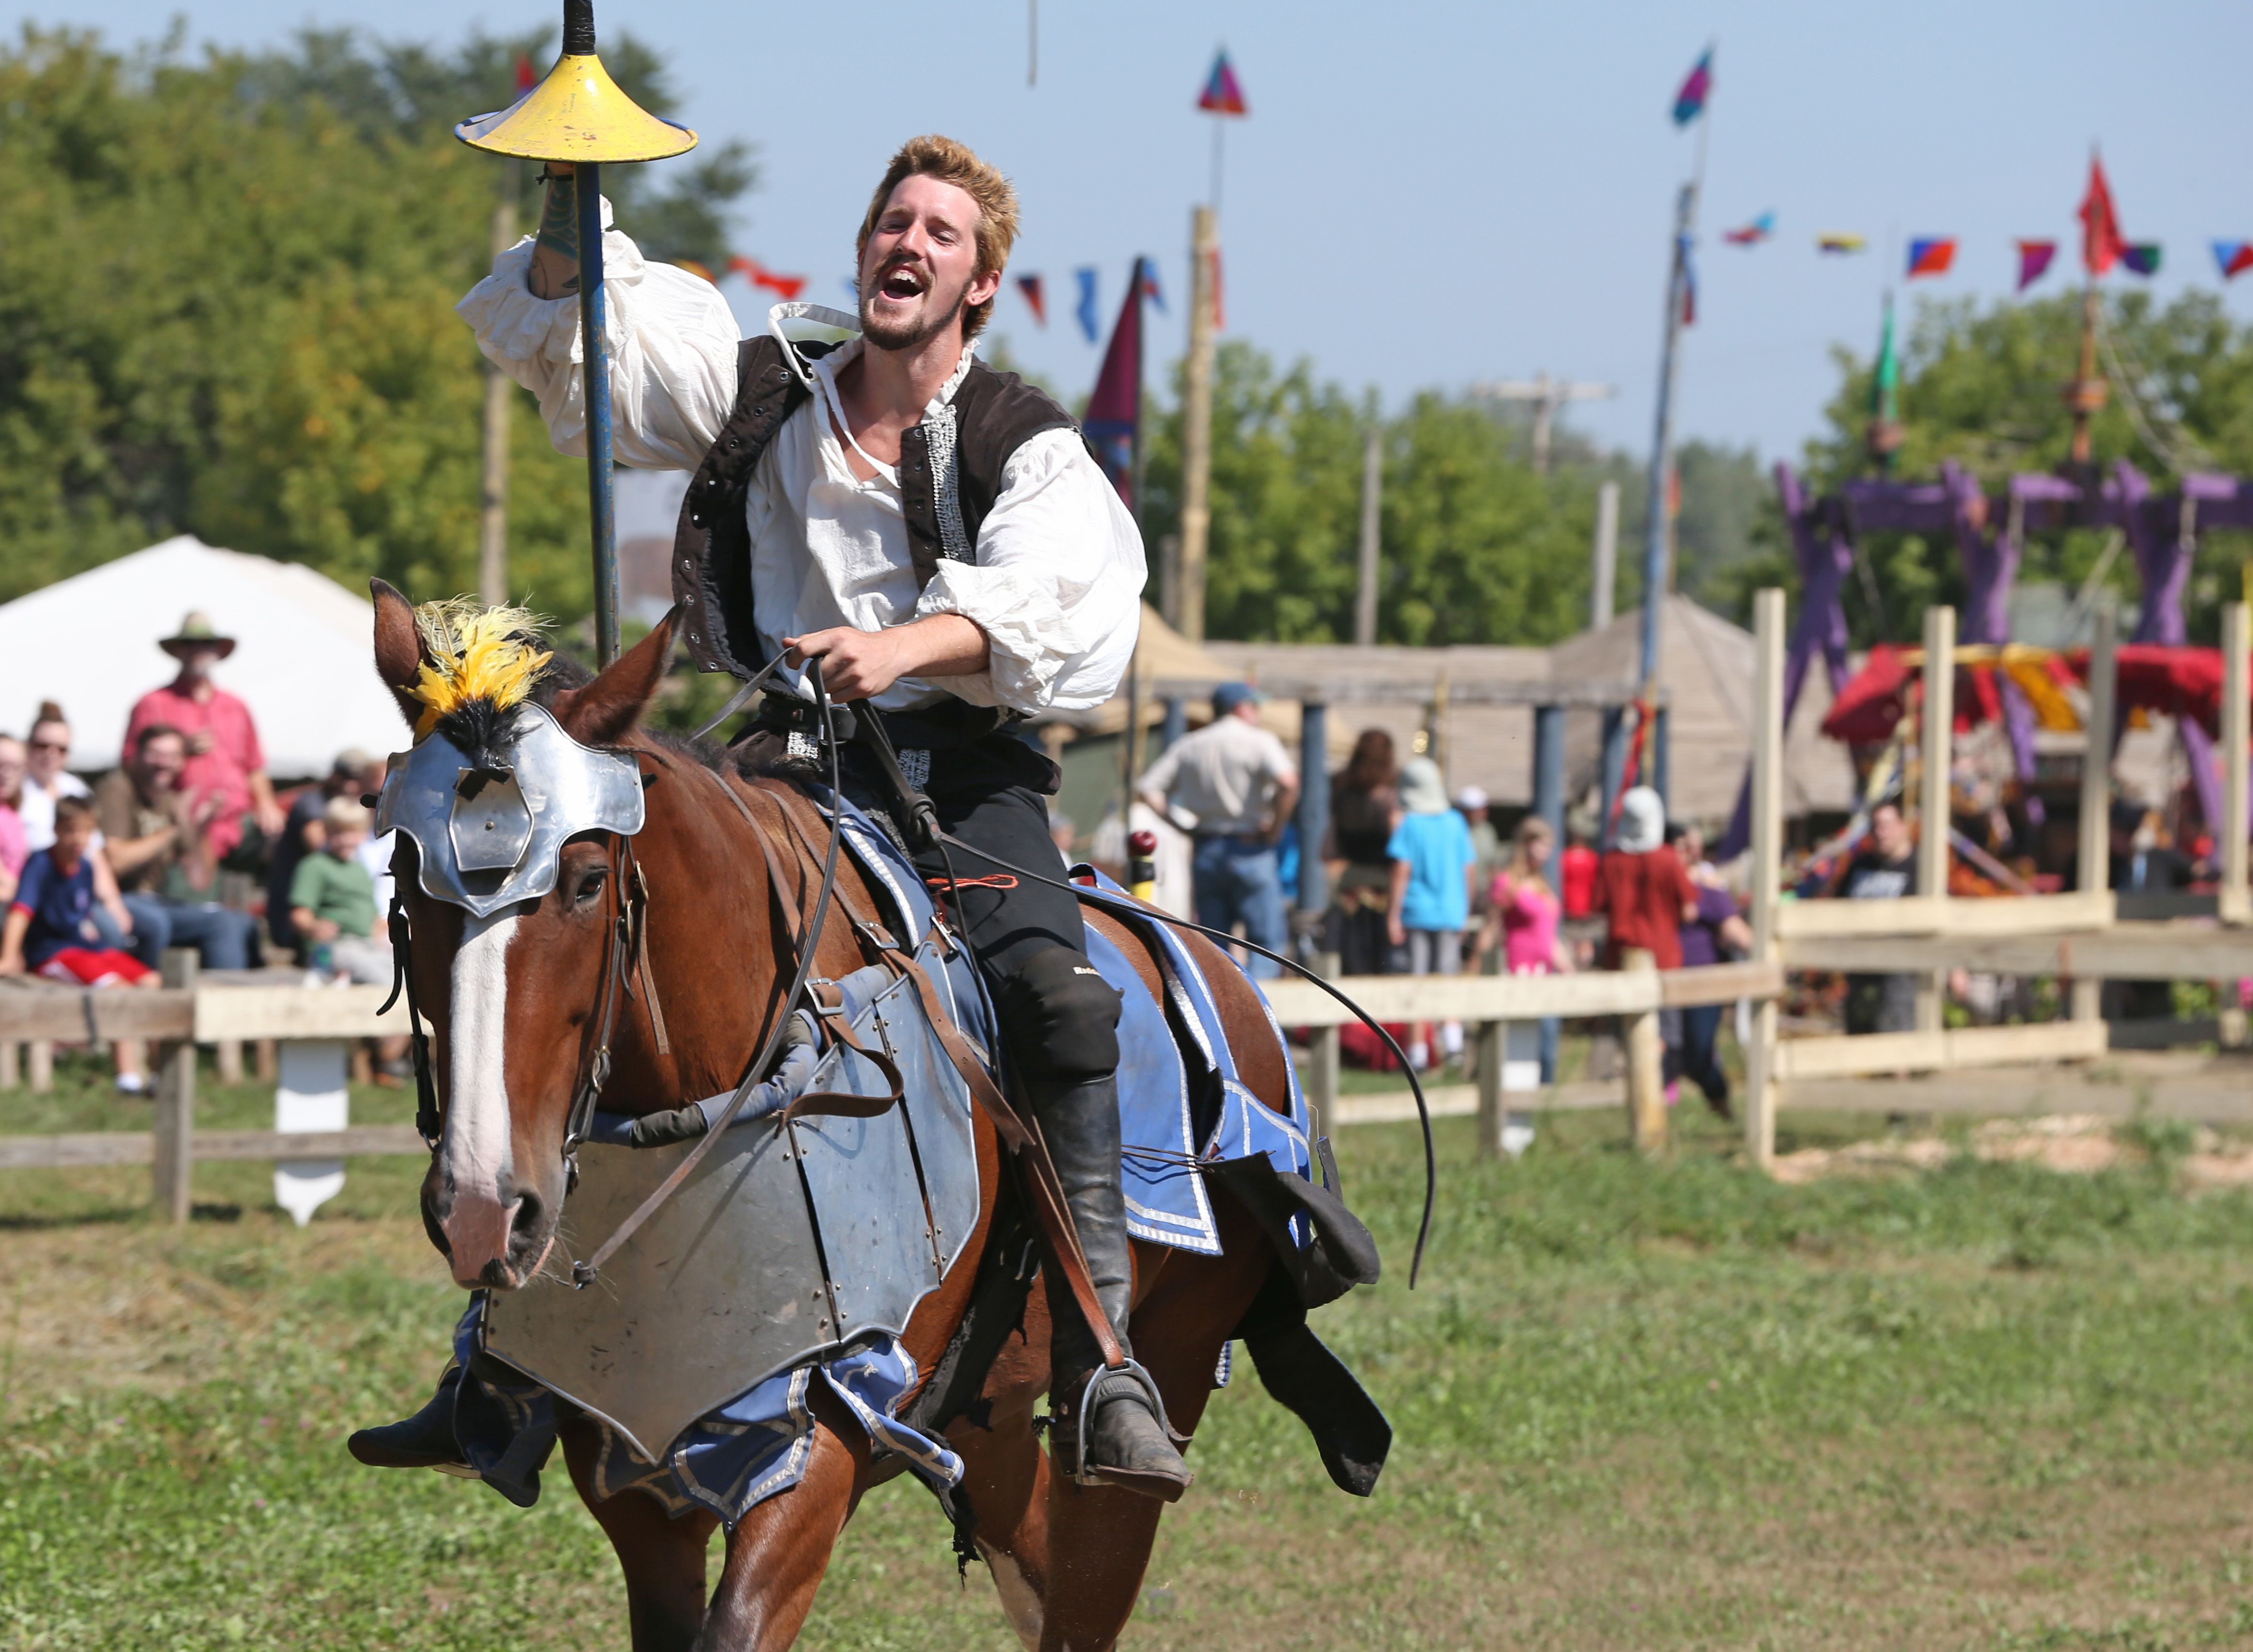 A man demonstrates jousting in renaissance clothing.